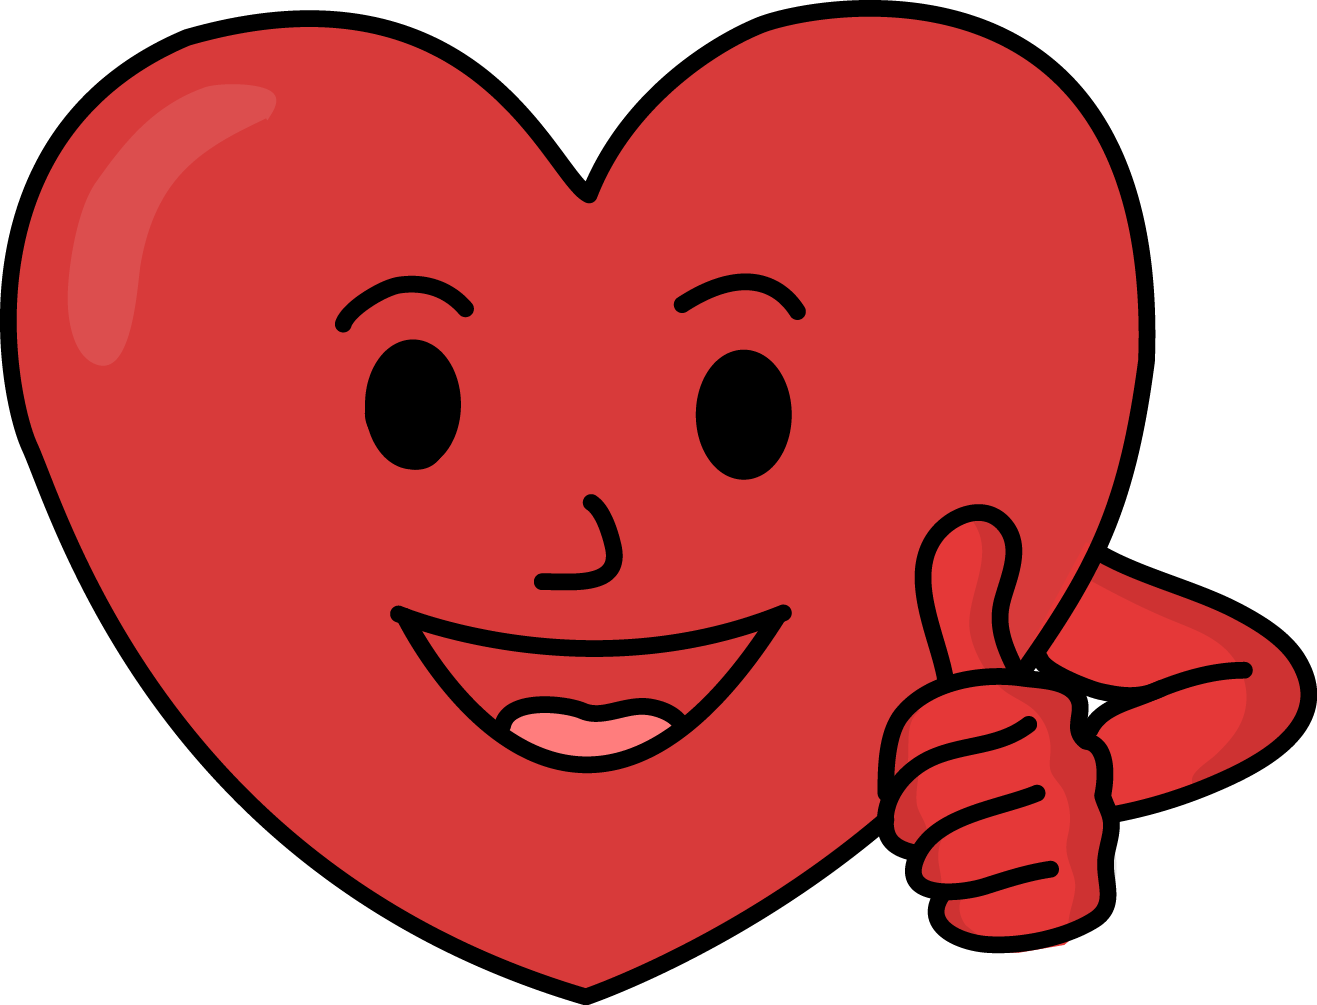 Image for free heart. Exercising clipart strong